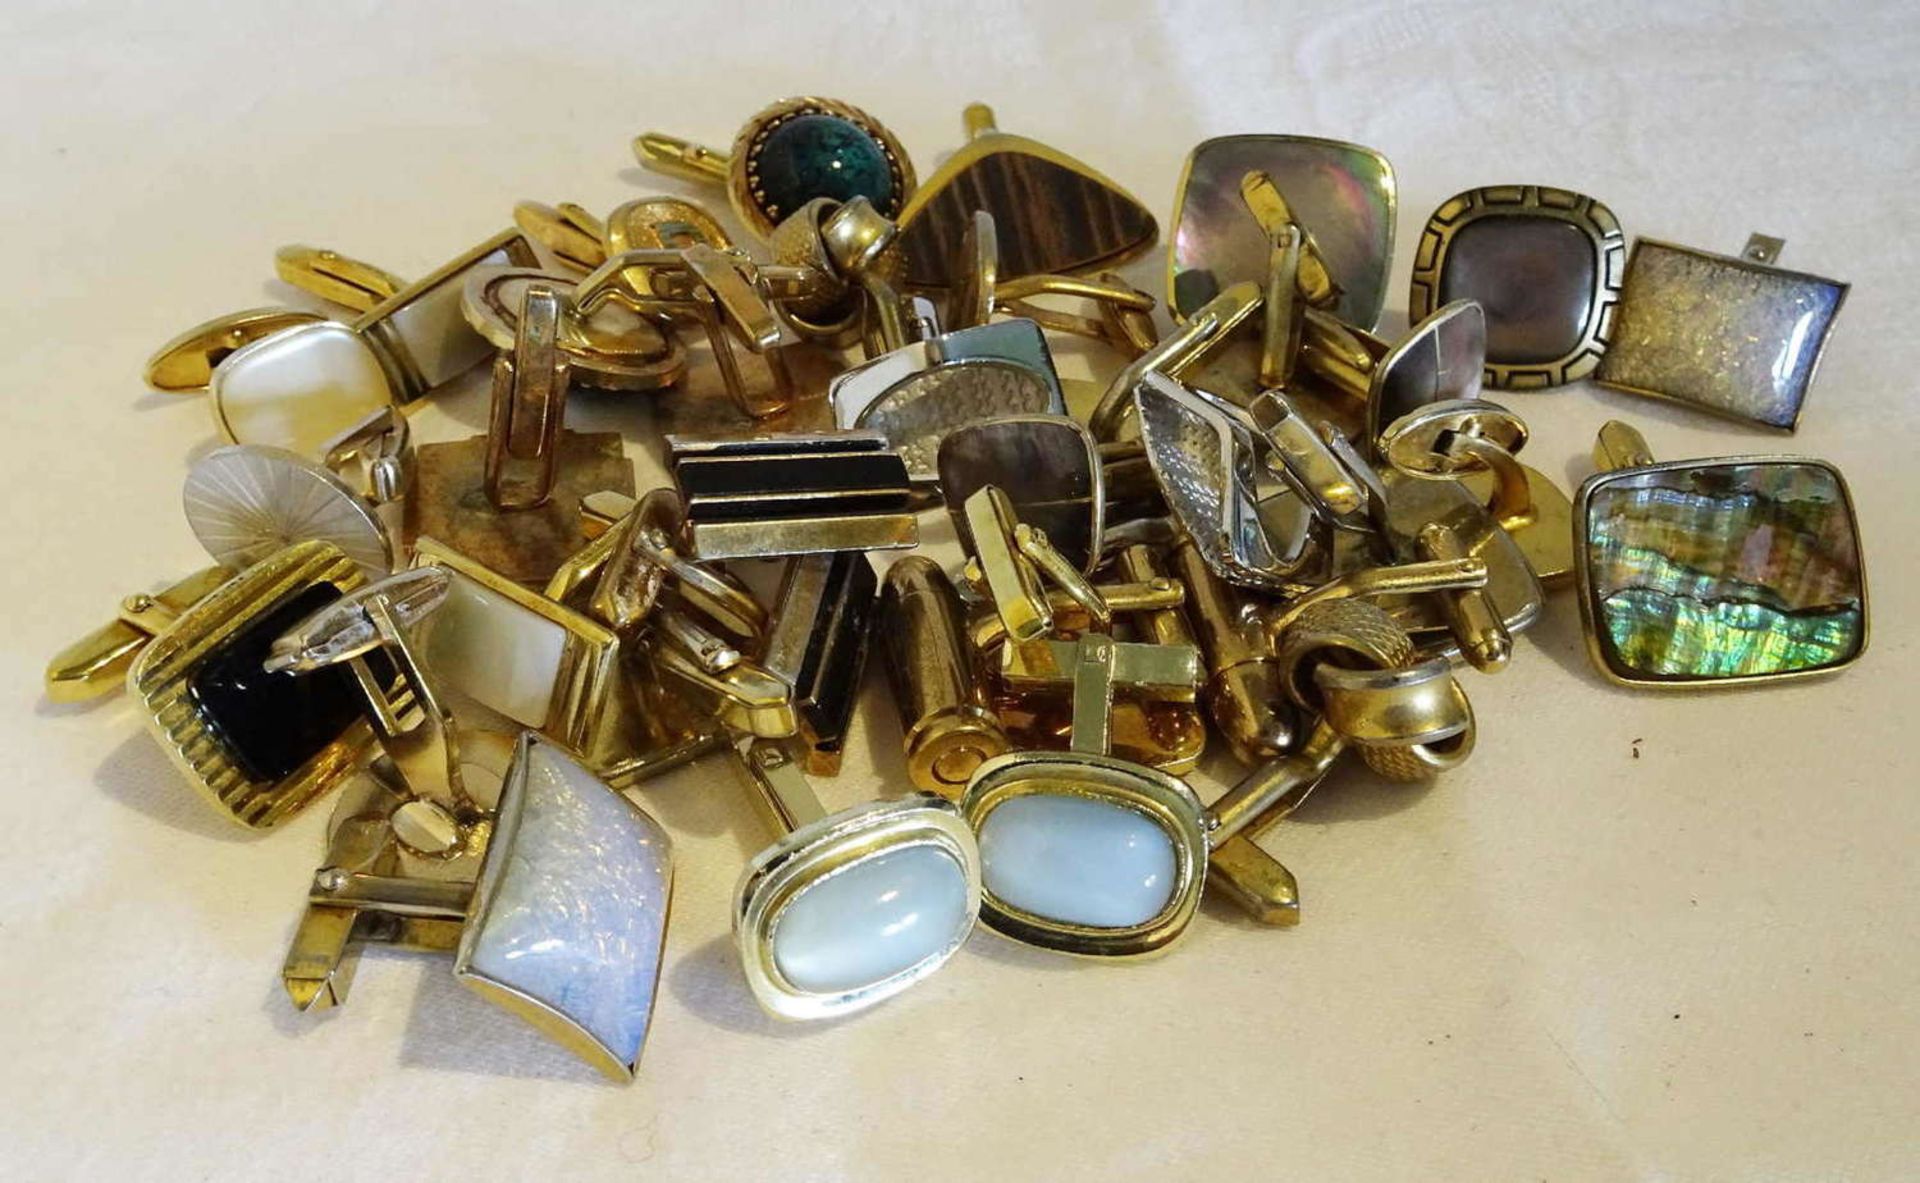 Lot of cufflinks, a total of 18 pairs from the 60s - 80s, base metal, very nice solder